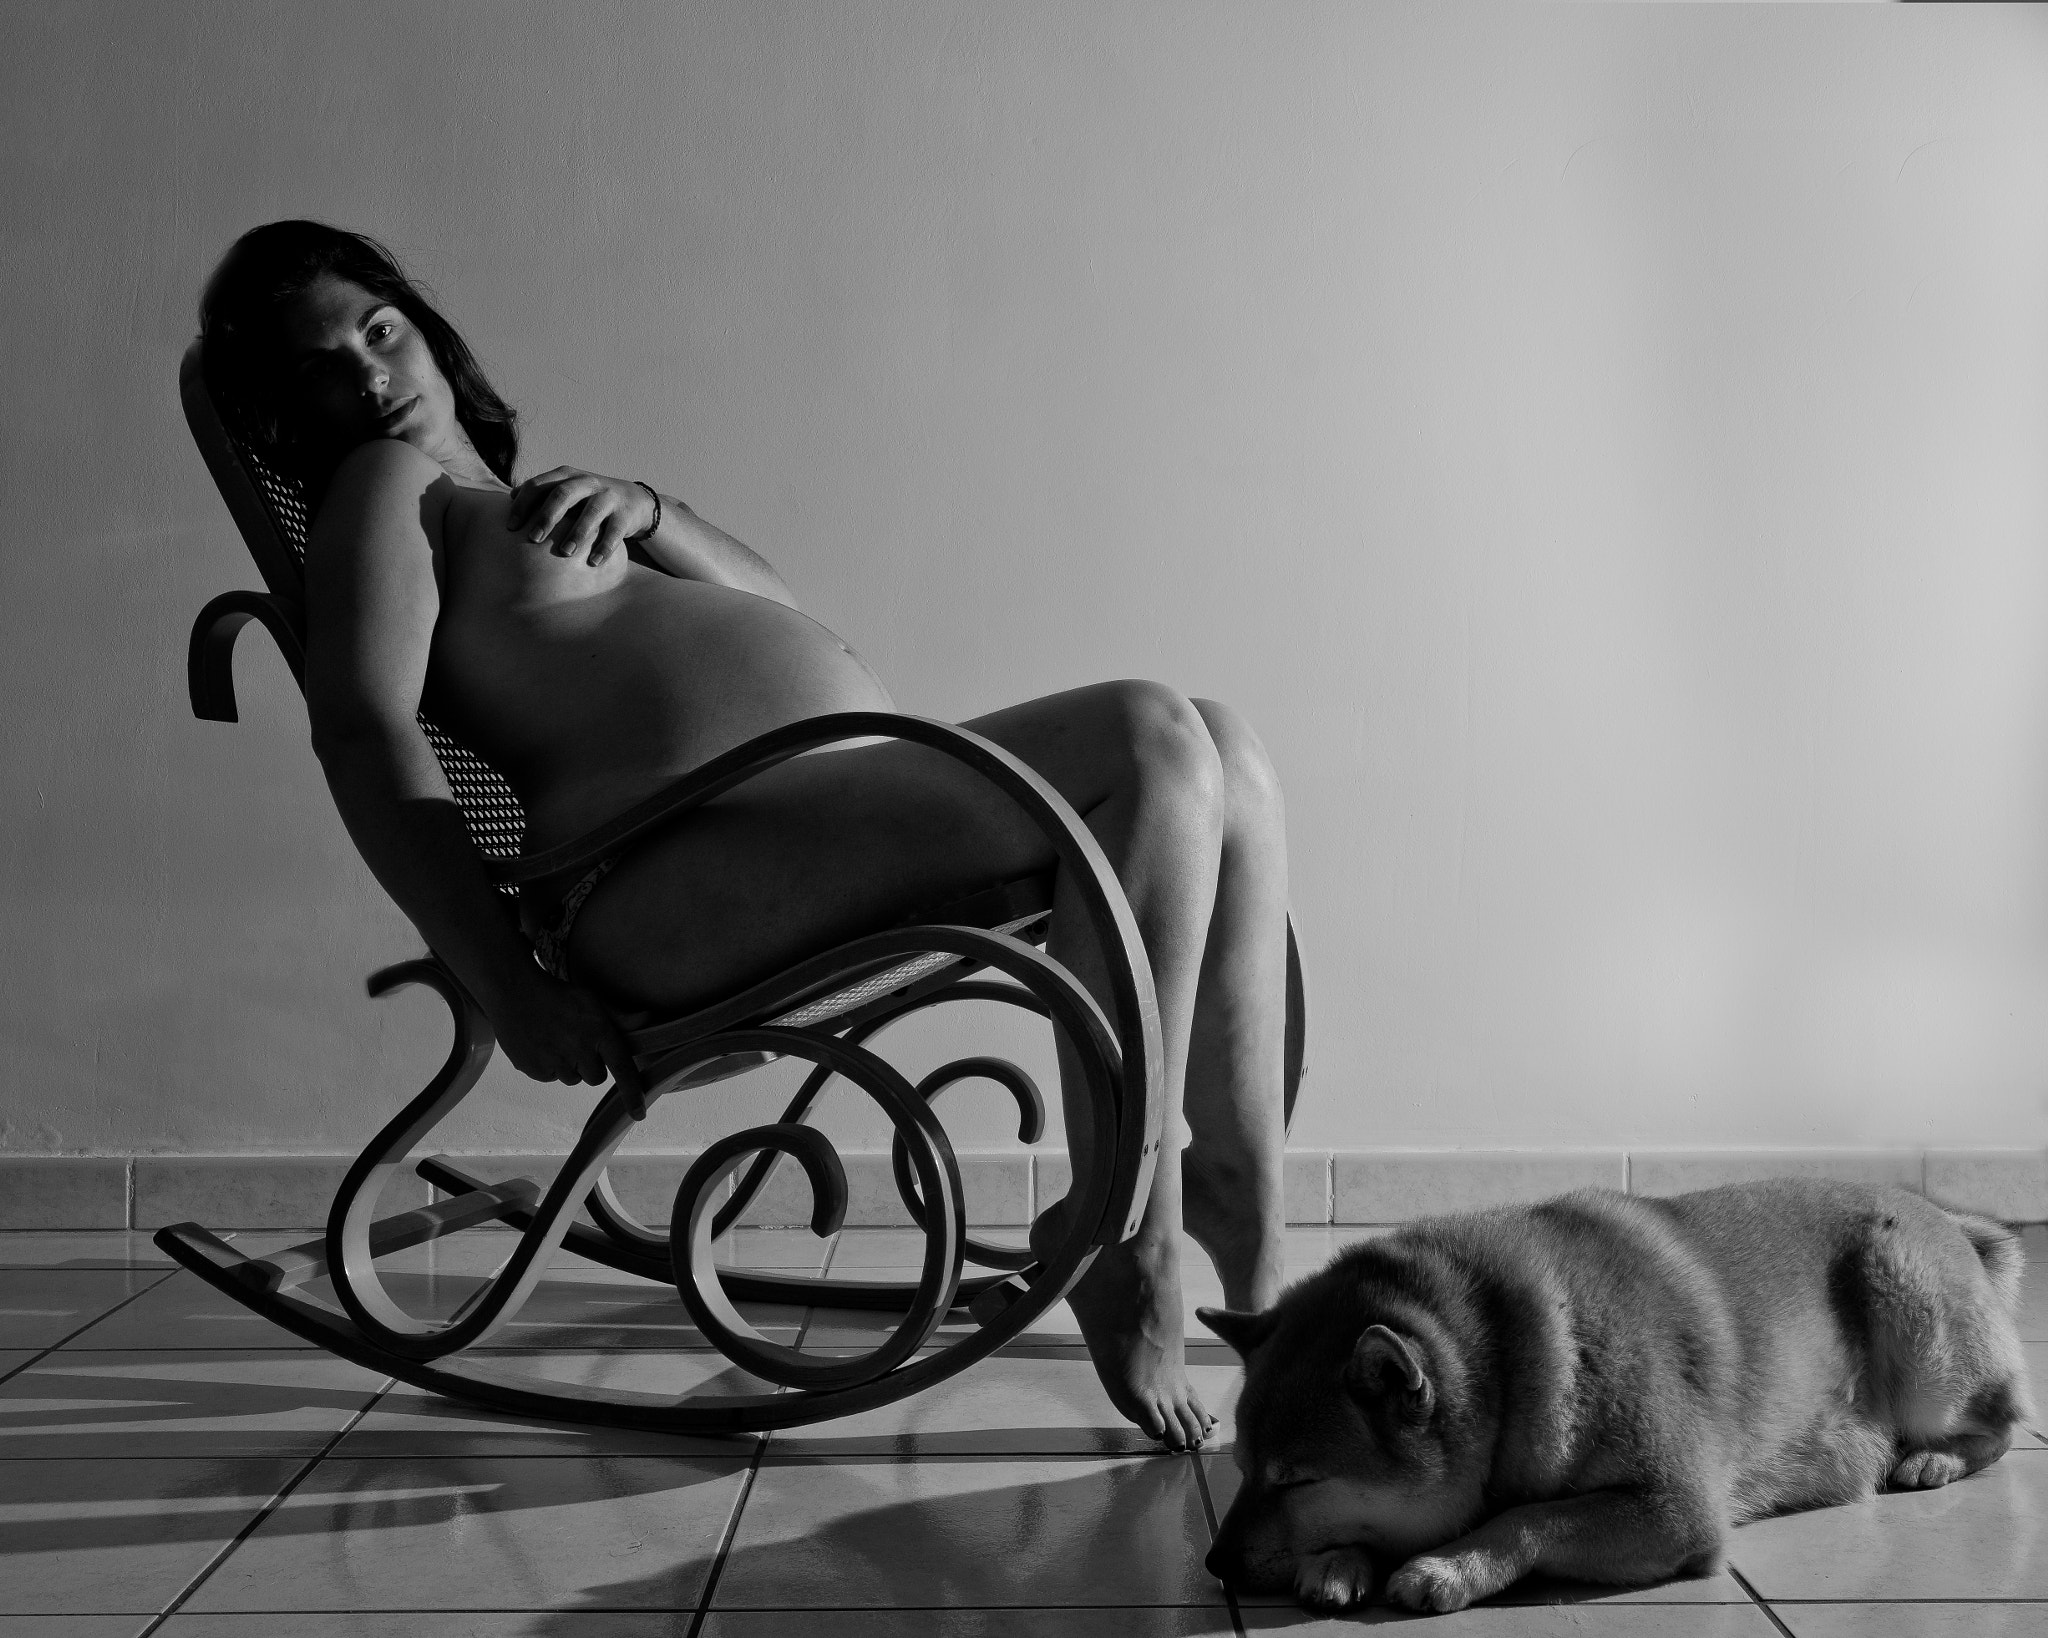 Pentax K-3 sample photo. The pregnant woman and her guardian dog photography